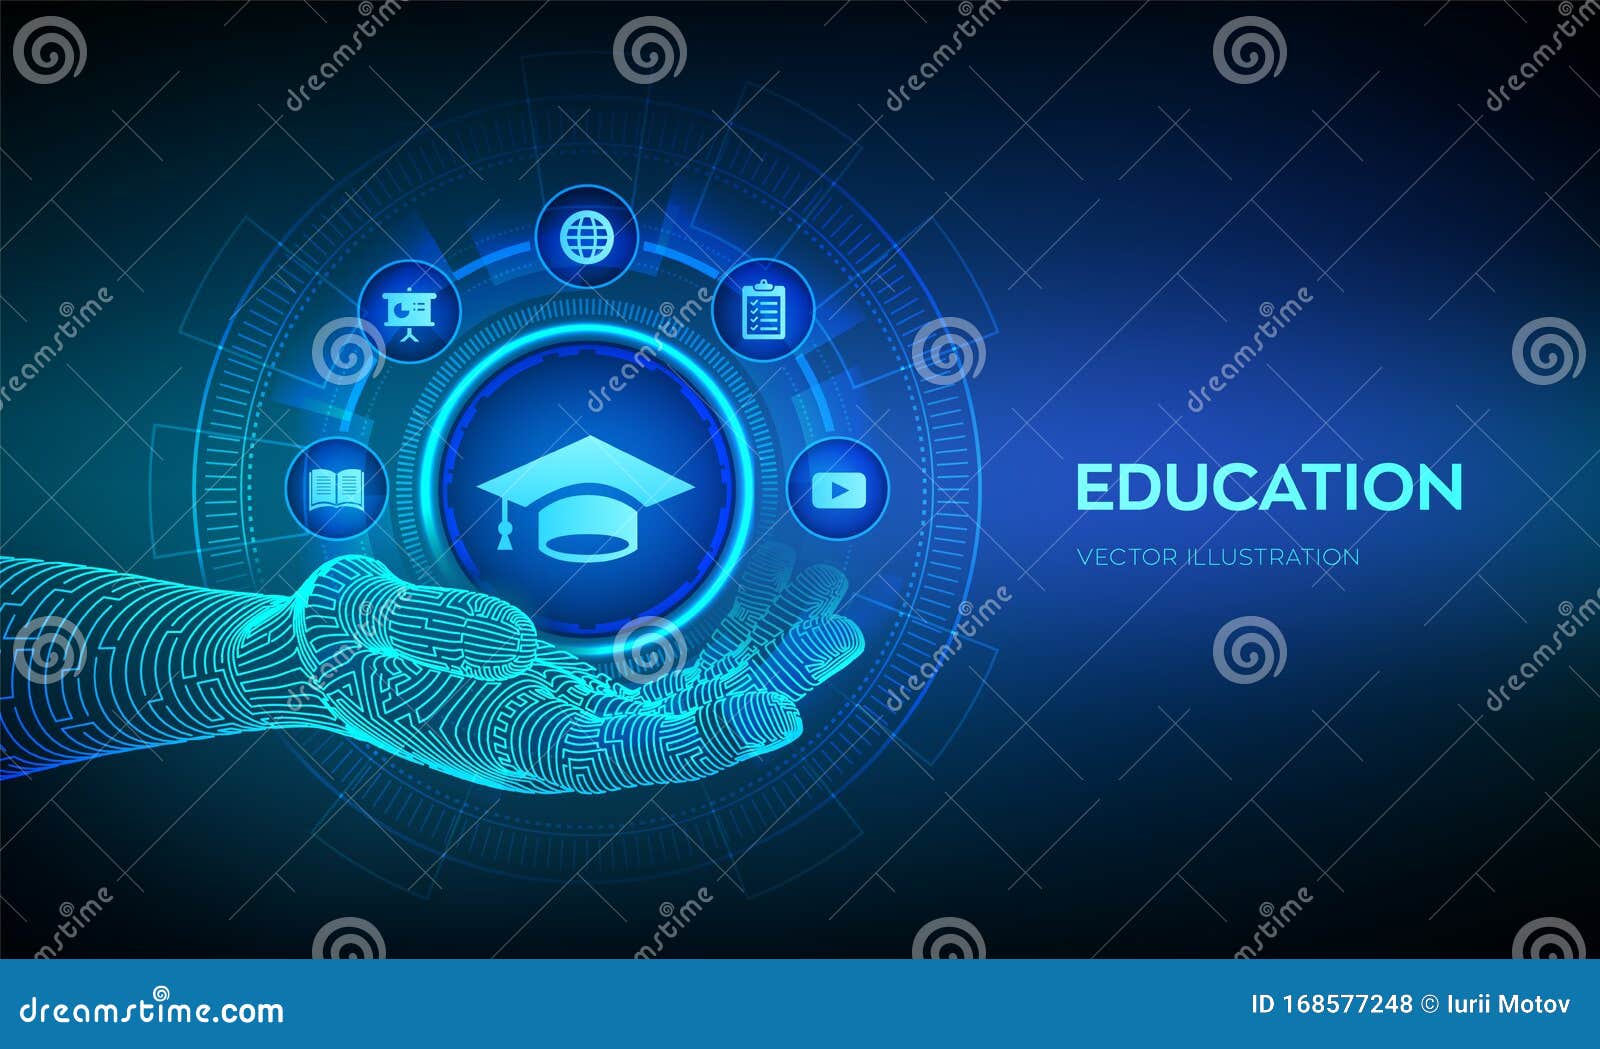 education icon in hand. innovative online e-learning and internet technology concept. webinar, knowledge, online training courses